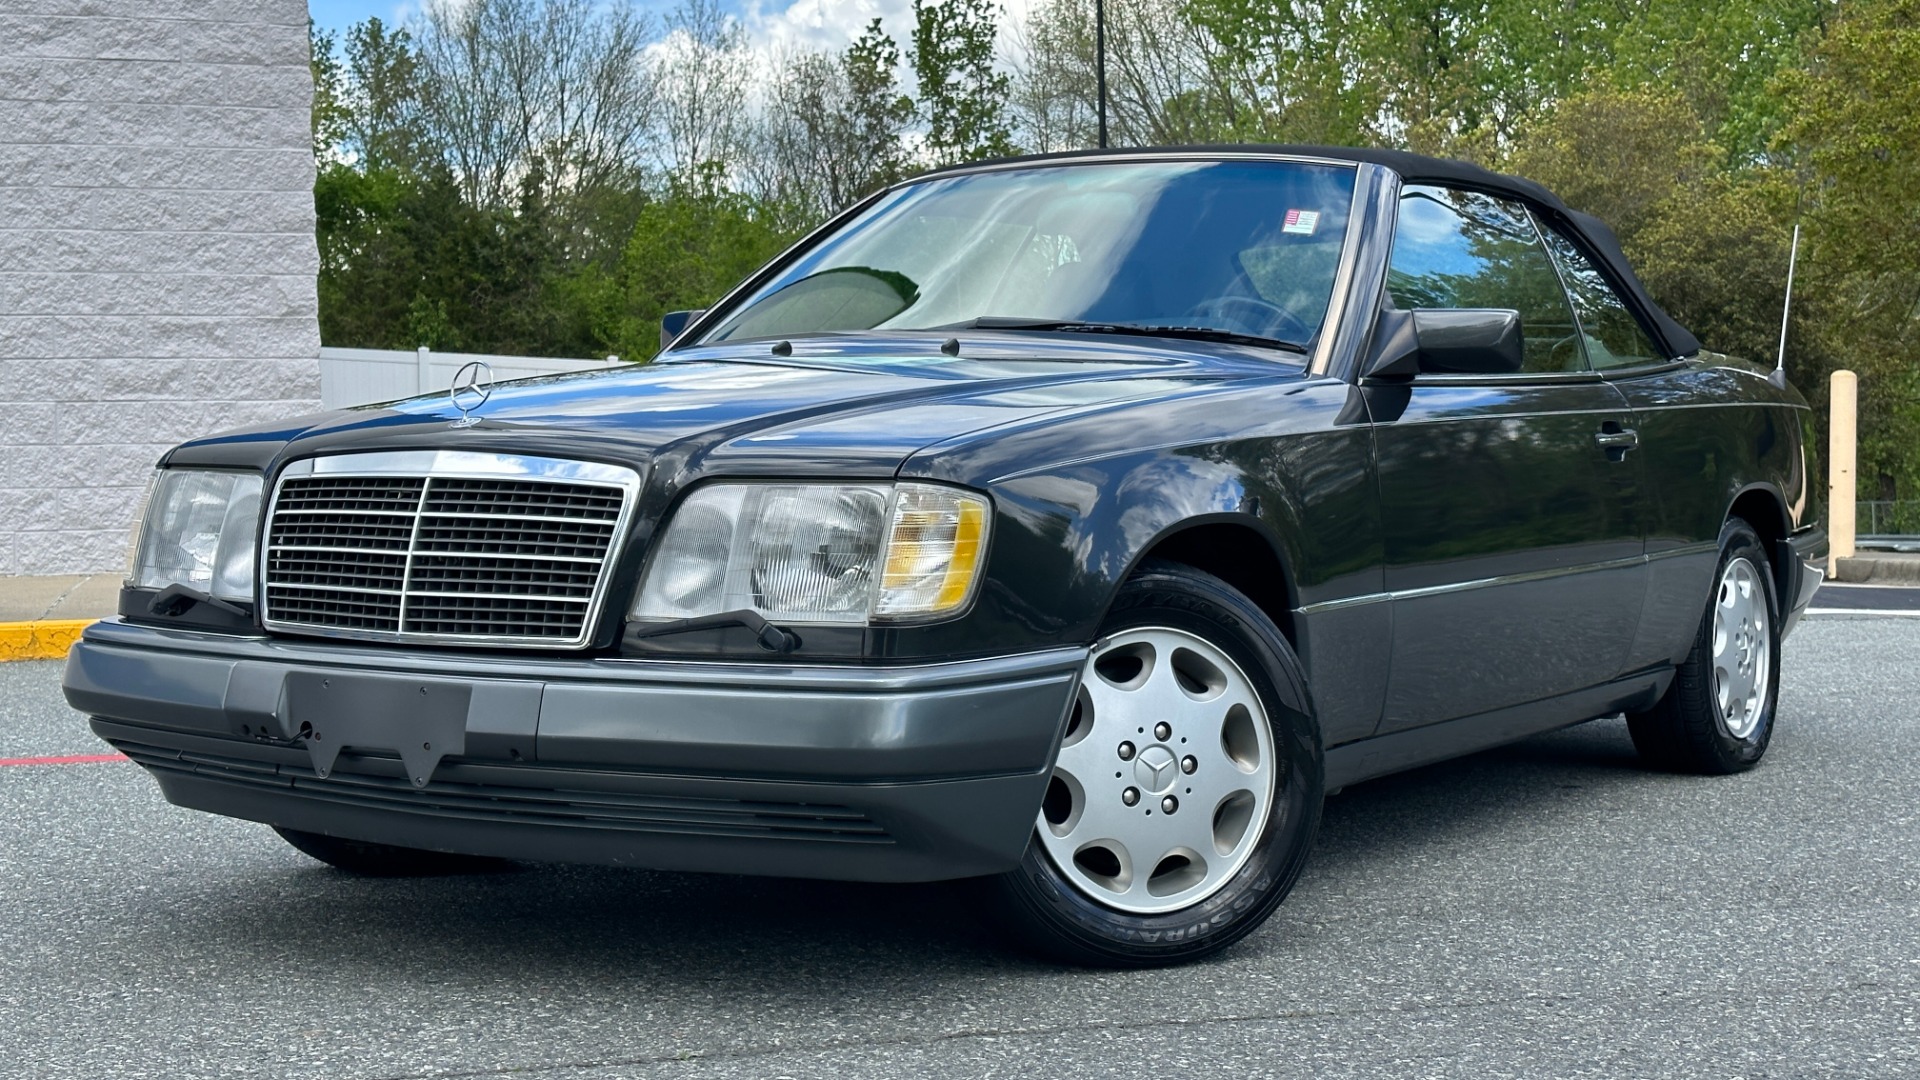 Used 1994 Mercedes-Benz 300 Series E 320 / CONVERTIBLE / MEMORY / POWER TOP / INLINE 6CYL / LEATHER for sale $23,500 at Formula Imports in Charlotte NC 28227 2